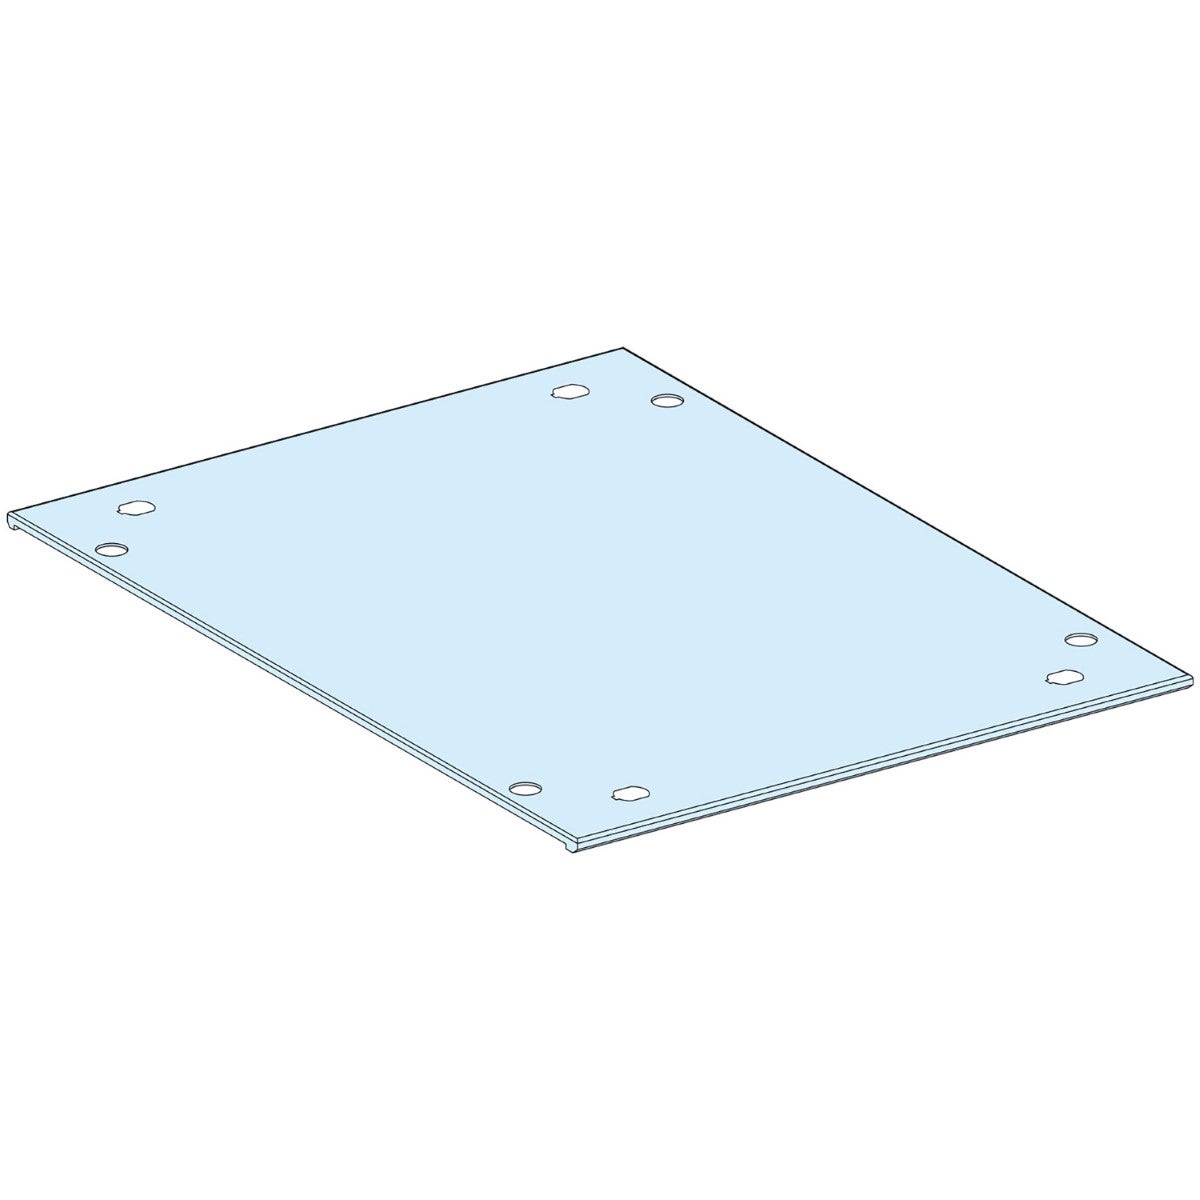 Roof plate, PrismaSeT P, for enclosure, W300mm, D600mm, IP30, white, RAL 9003